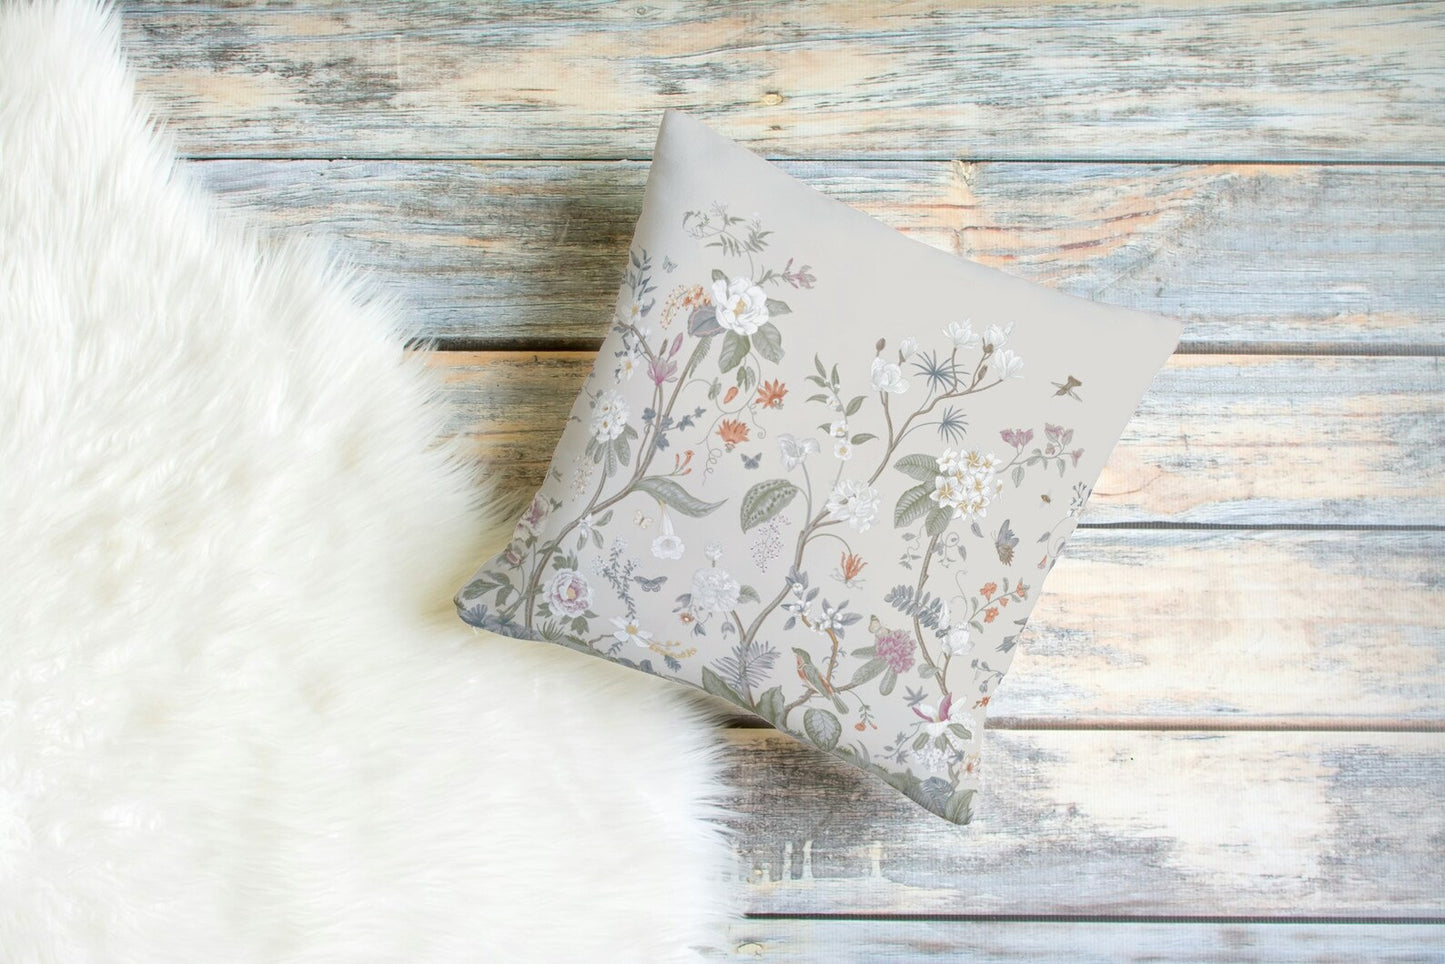 Chinoiserie Floral Outdoor Pillows Dove Grey